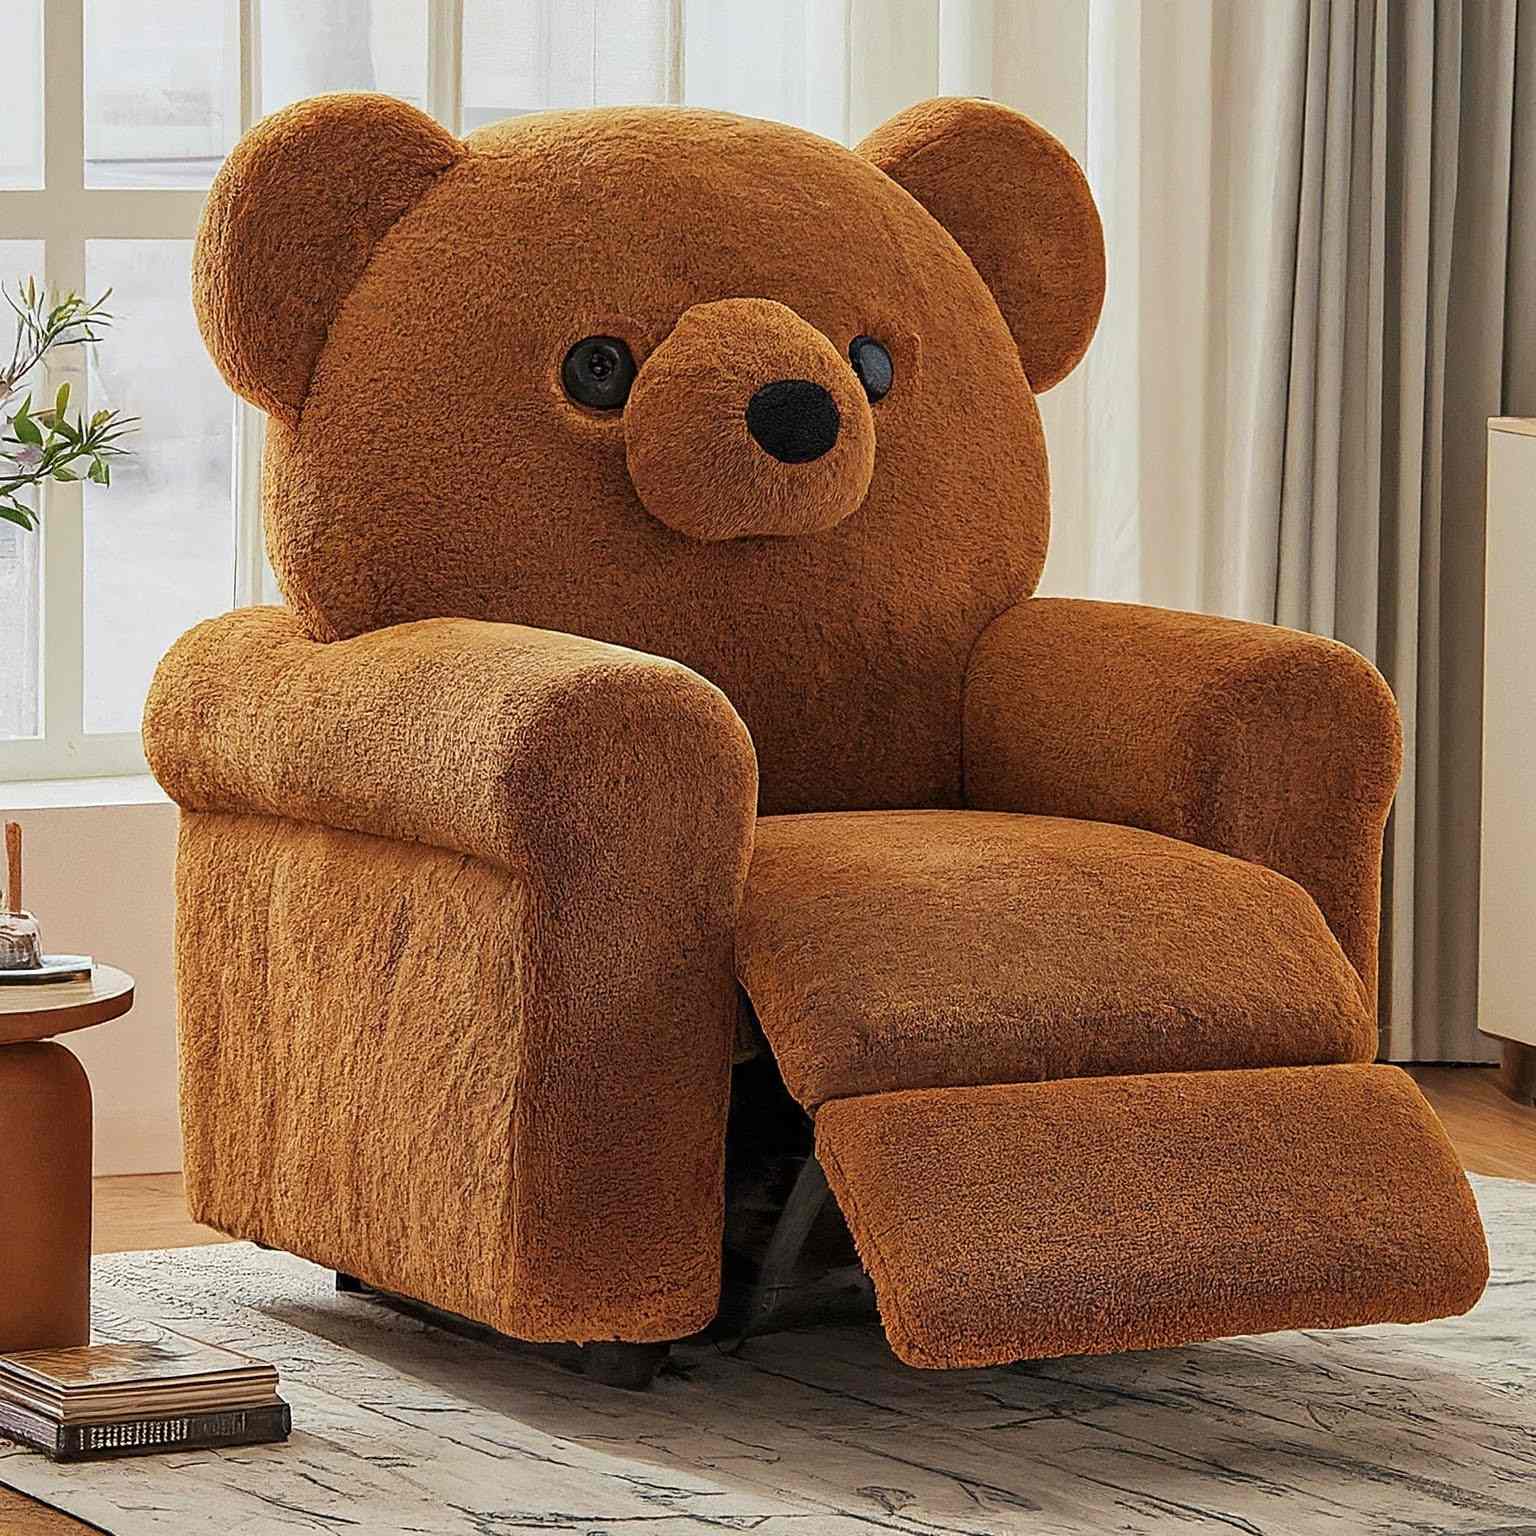 Teddy Bear Inspired Recliner: Sit Back, Relax, and Snuggle Up in Style